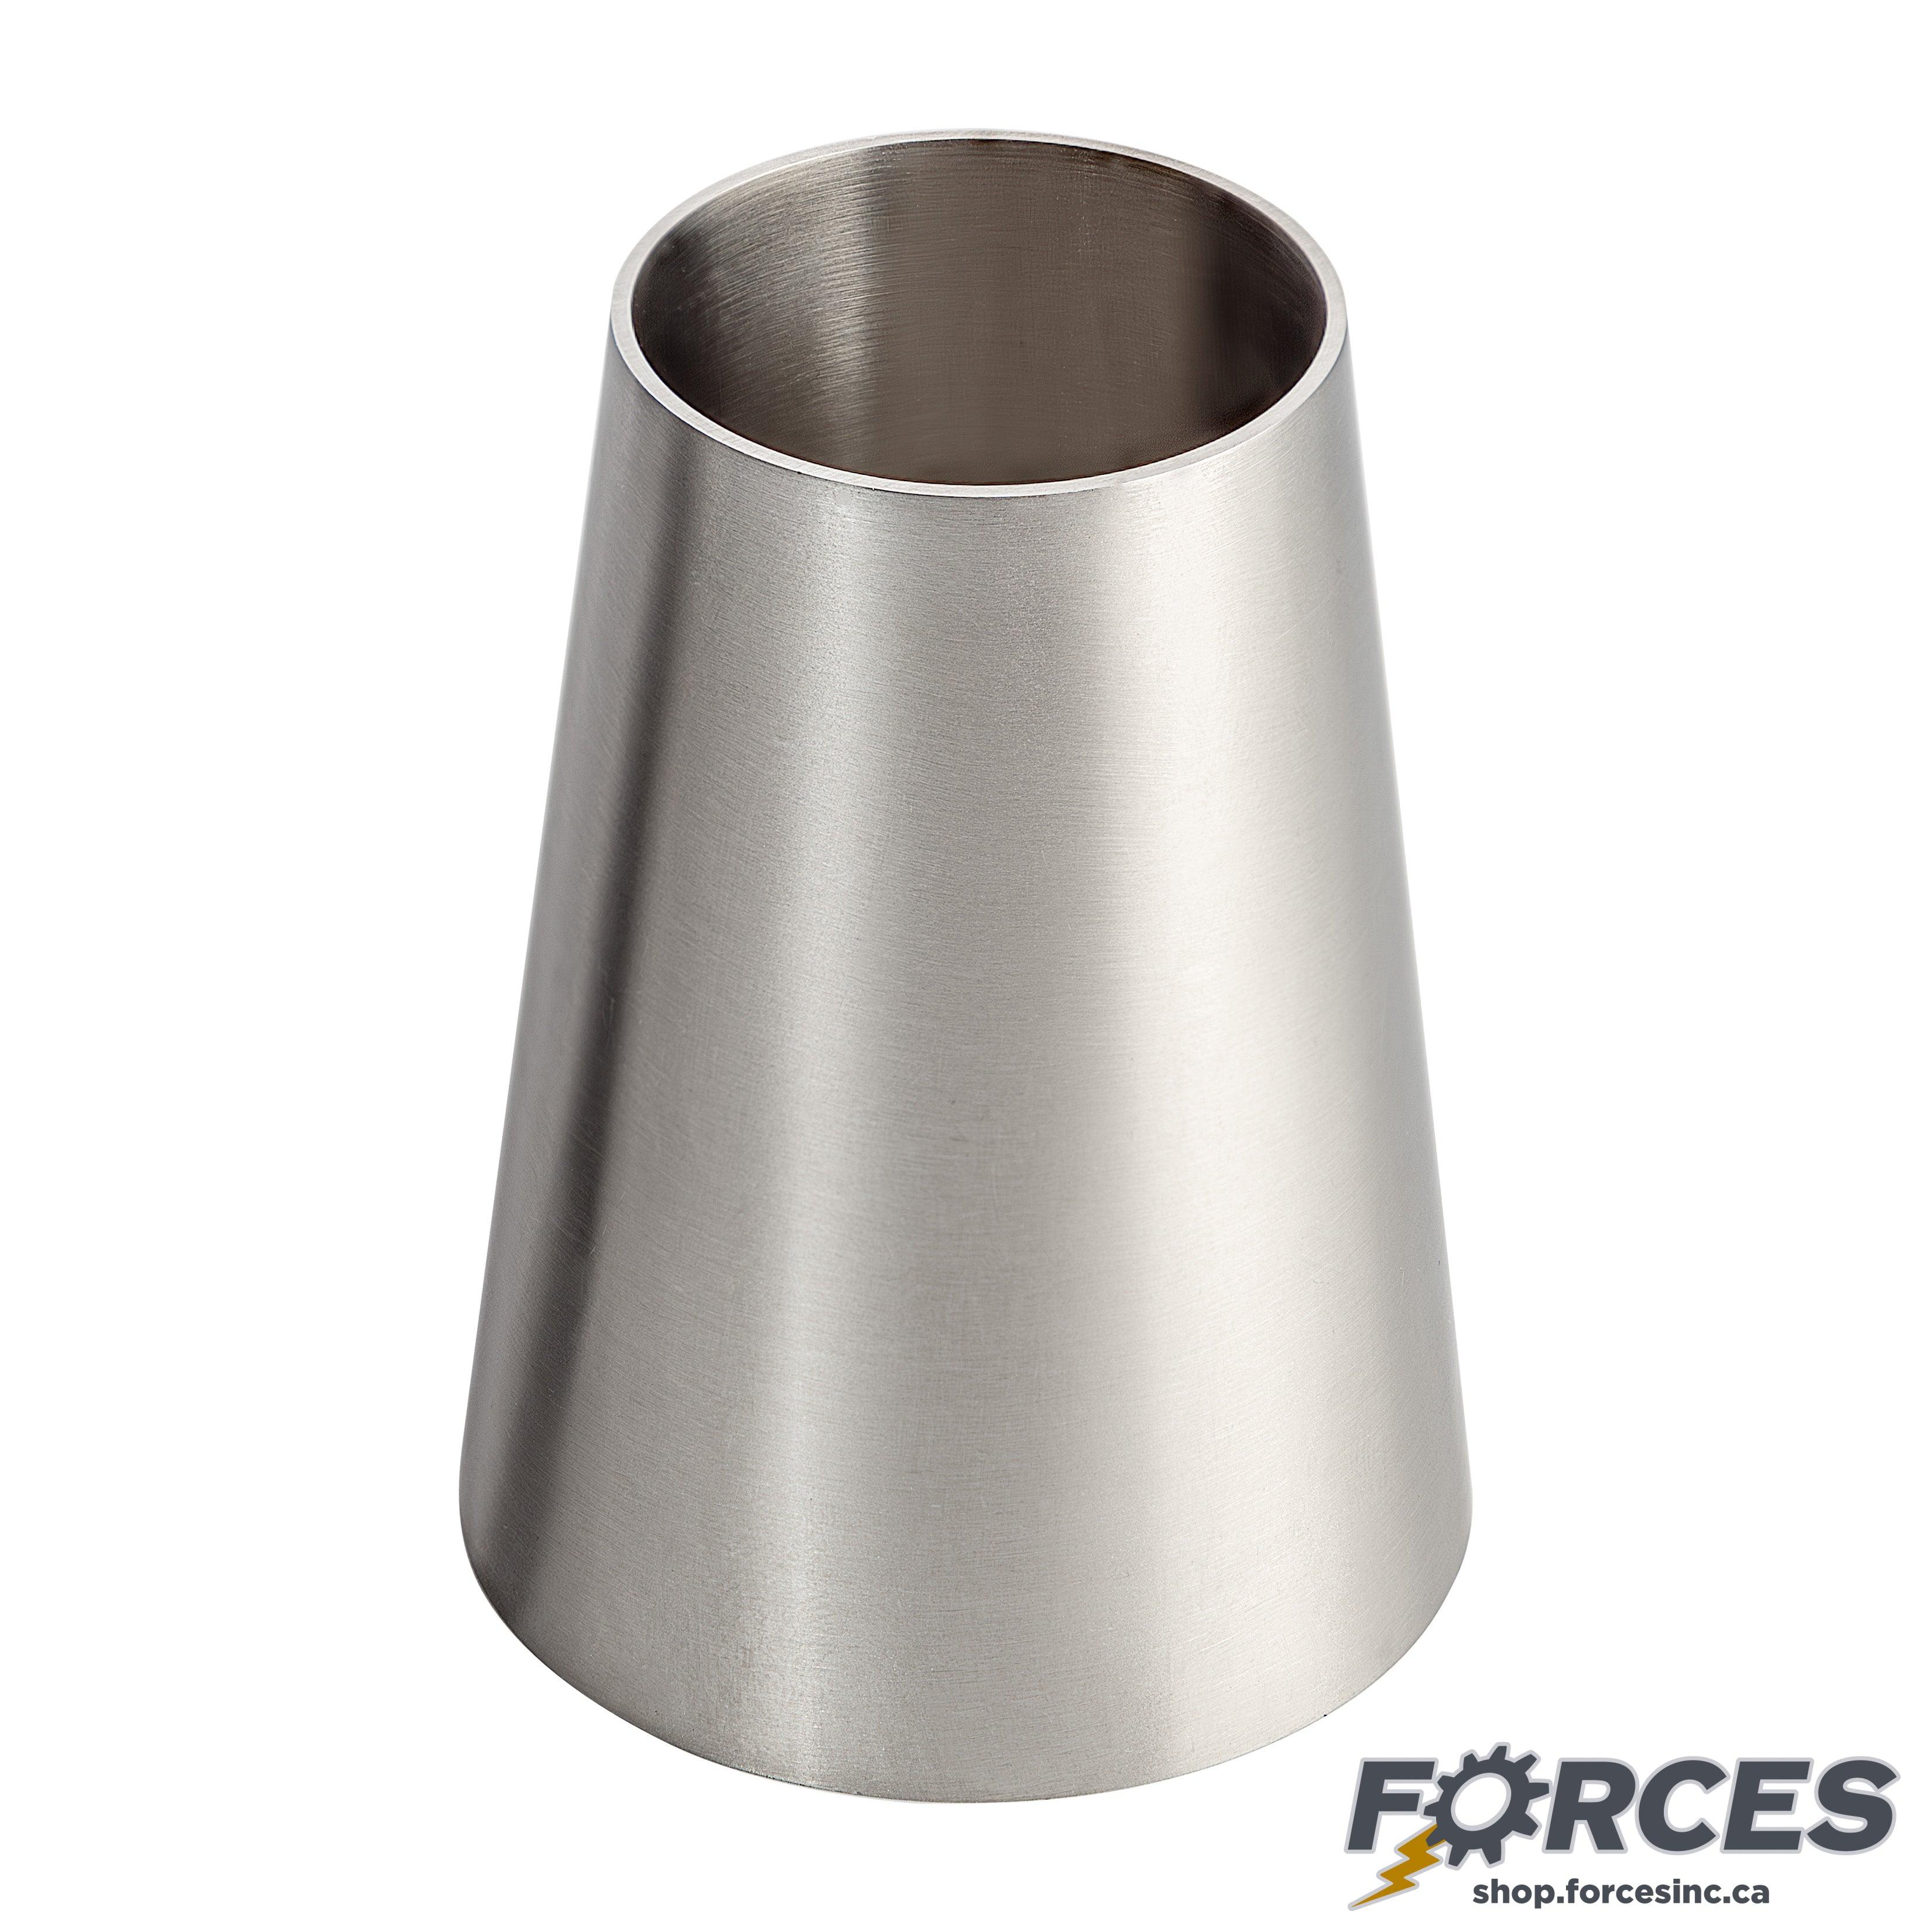 3" x 1-1/2" Butt Weld Concentric Reducer - Stainless Steel 316 - Forces Inc